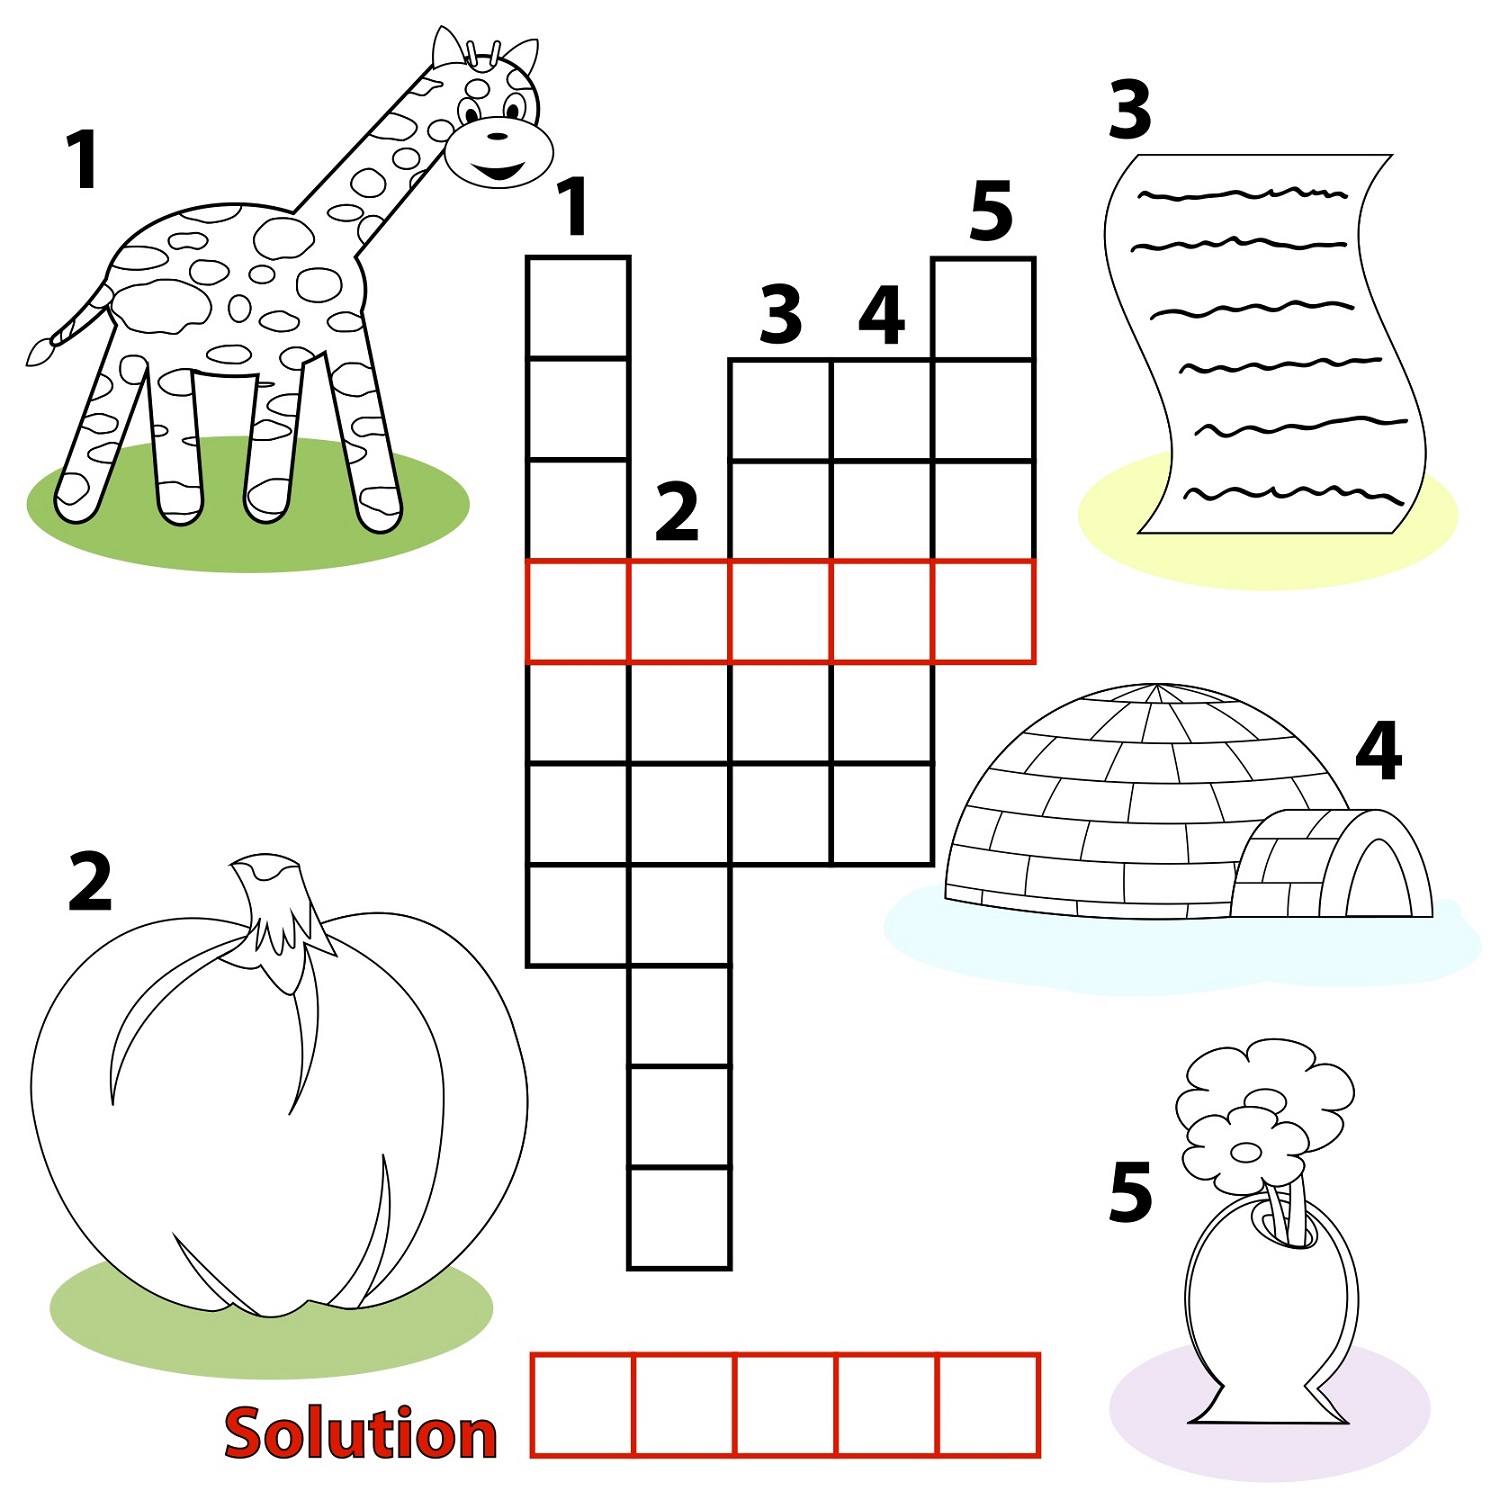 printable-crosswords-puzzles-kids-activity-shelter